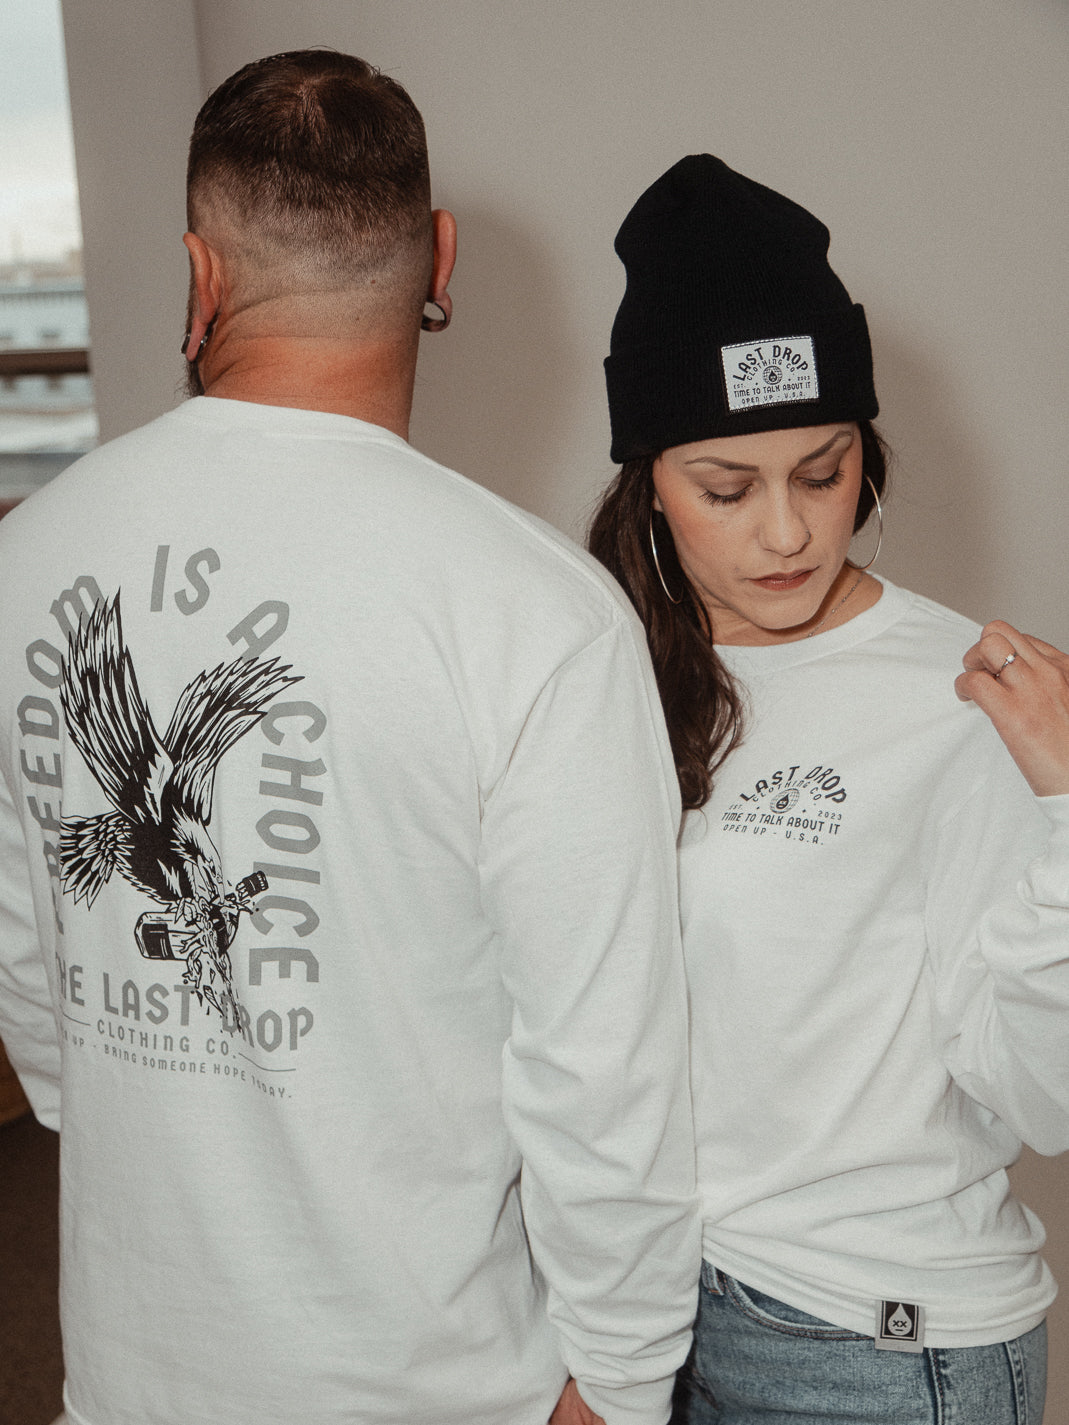 A man and woman proudly showcase their independence and strength as they wear white long sleeve t-shirts adorned with a majestic eagle symbolizing freedom.